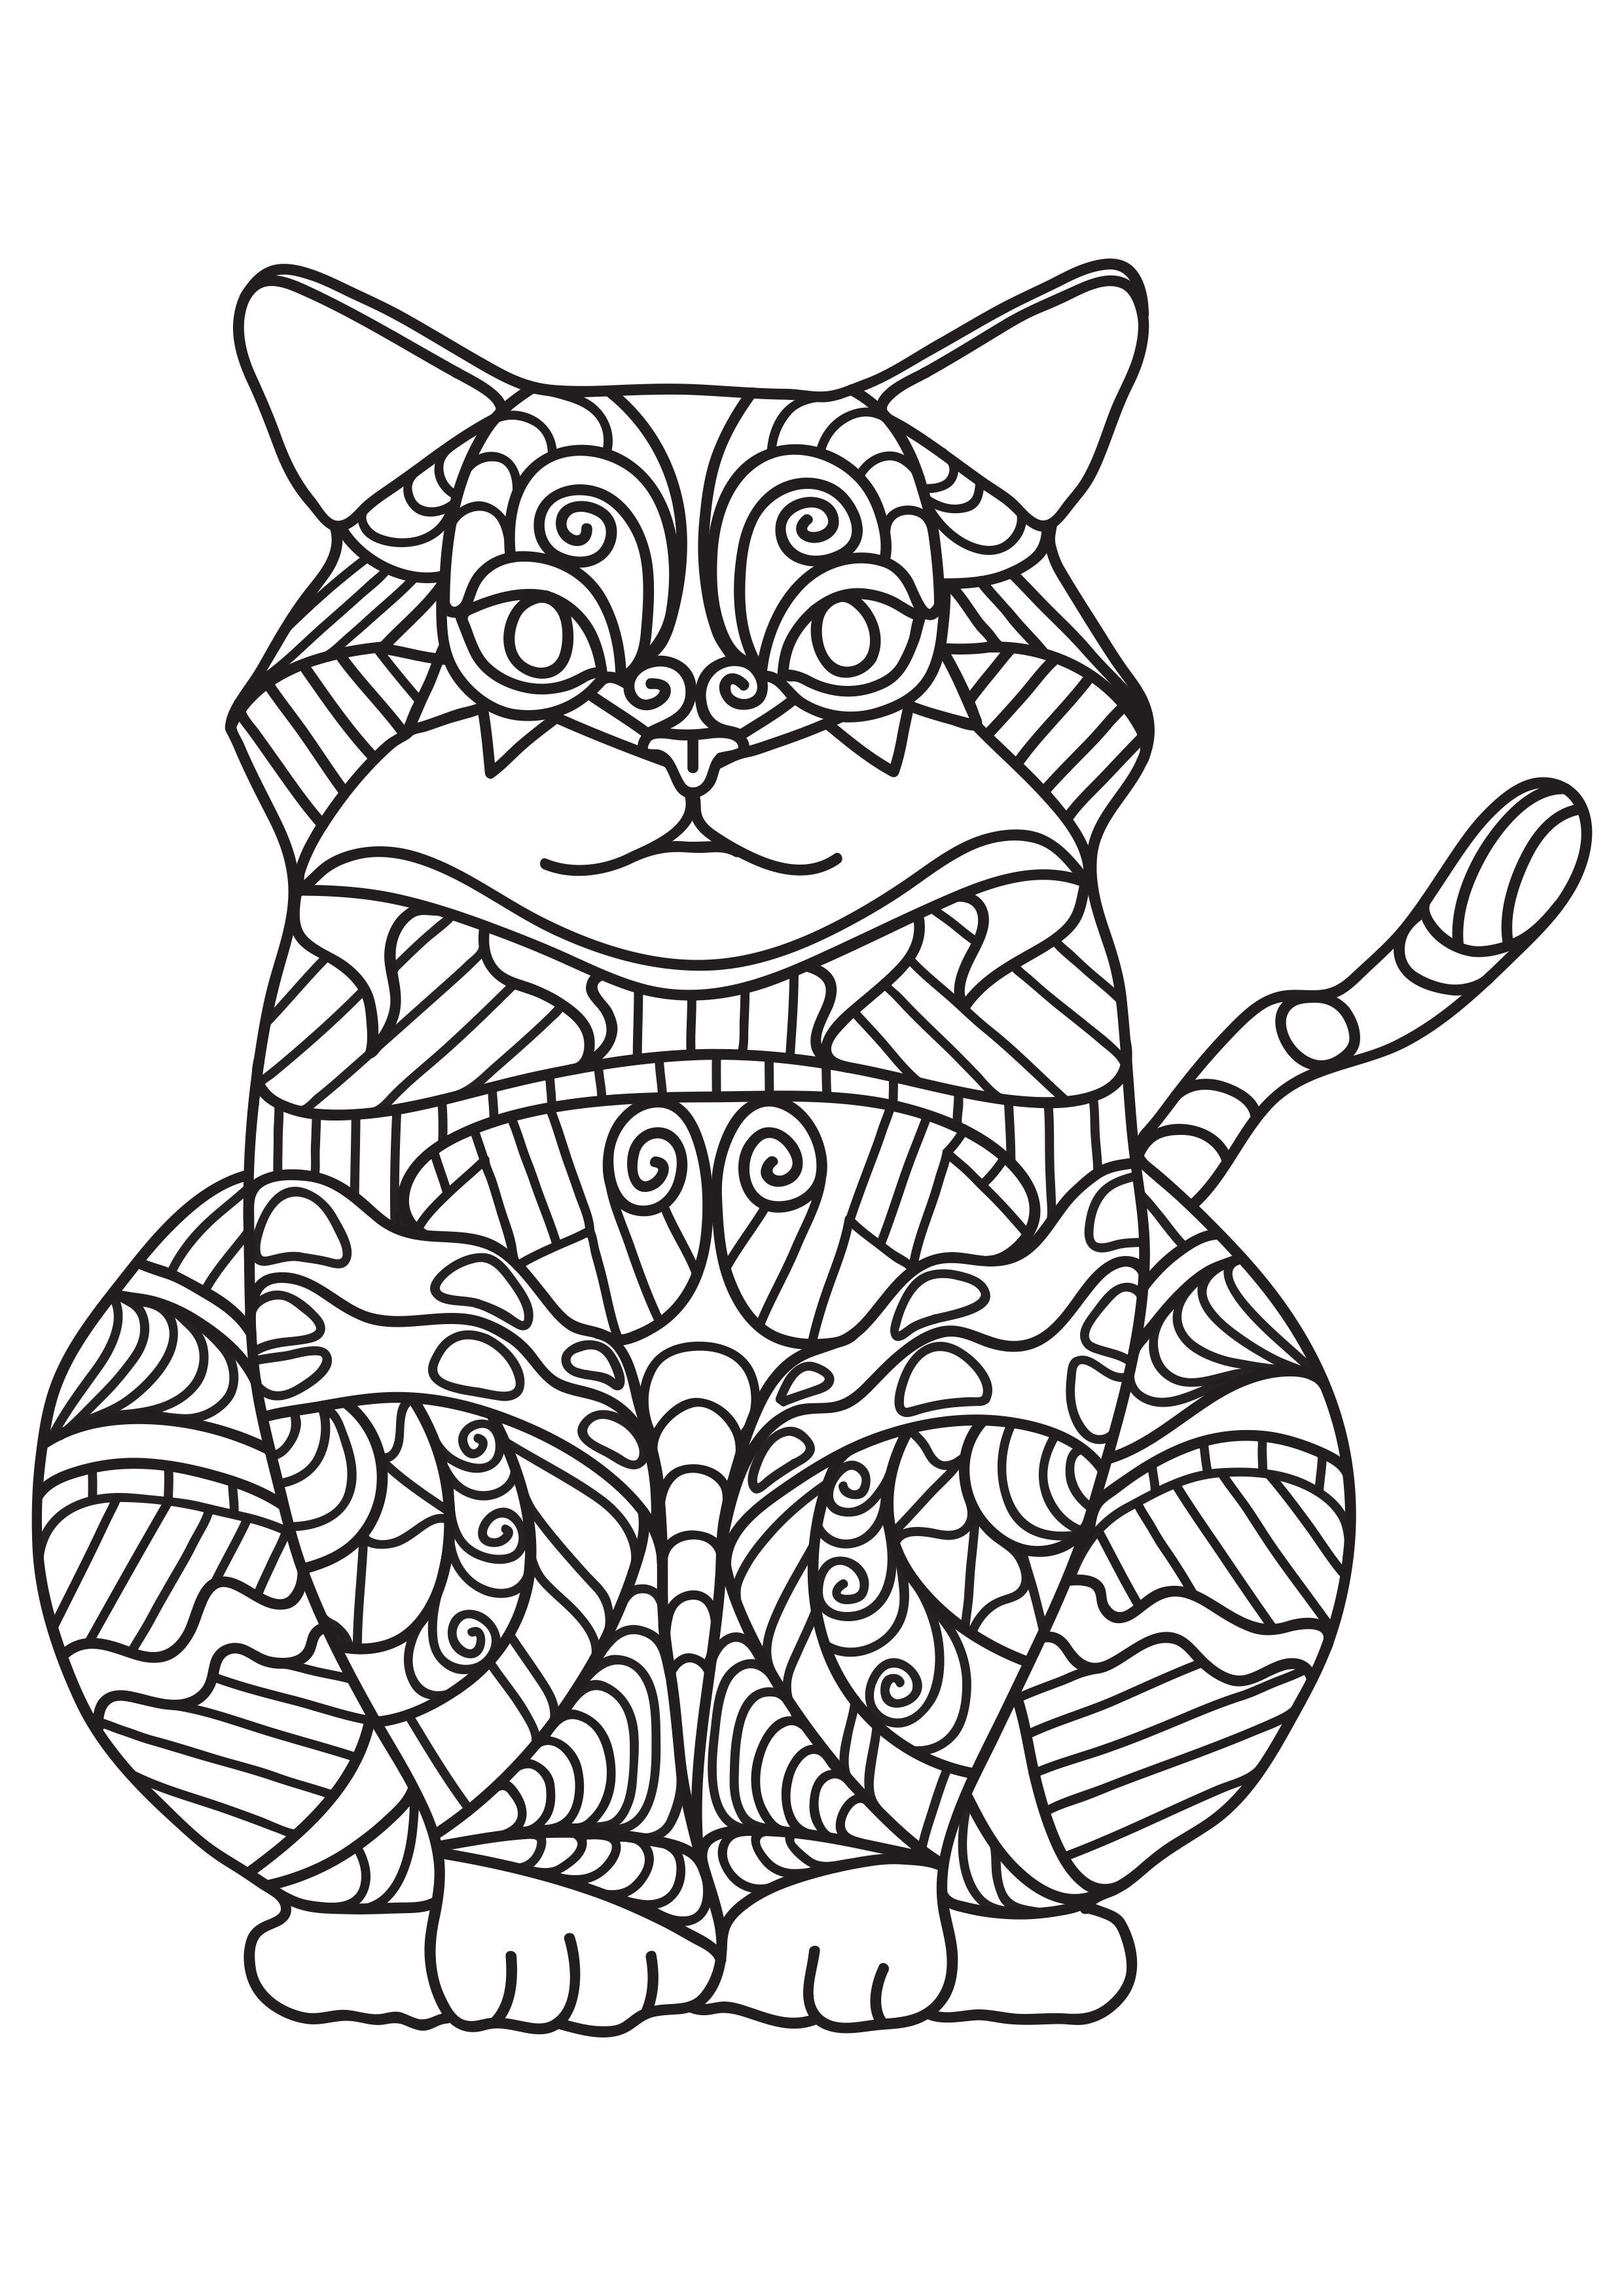 Coloriage gros chat